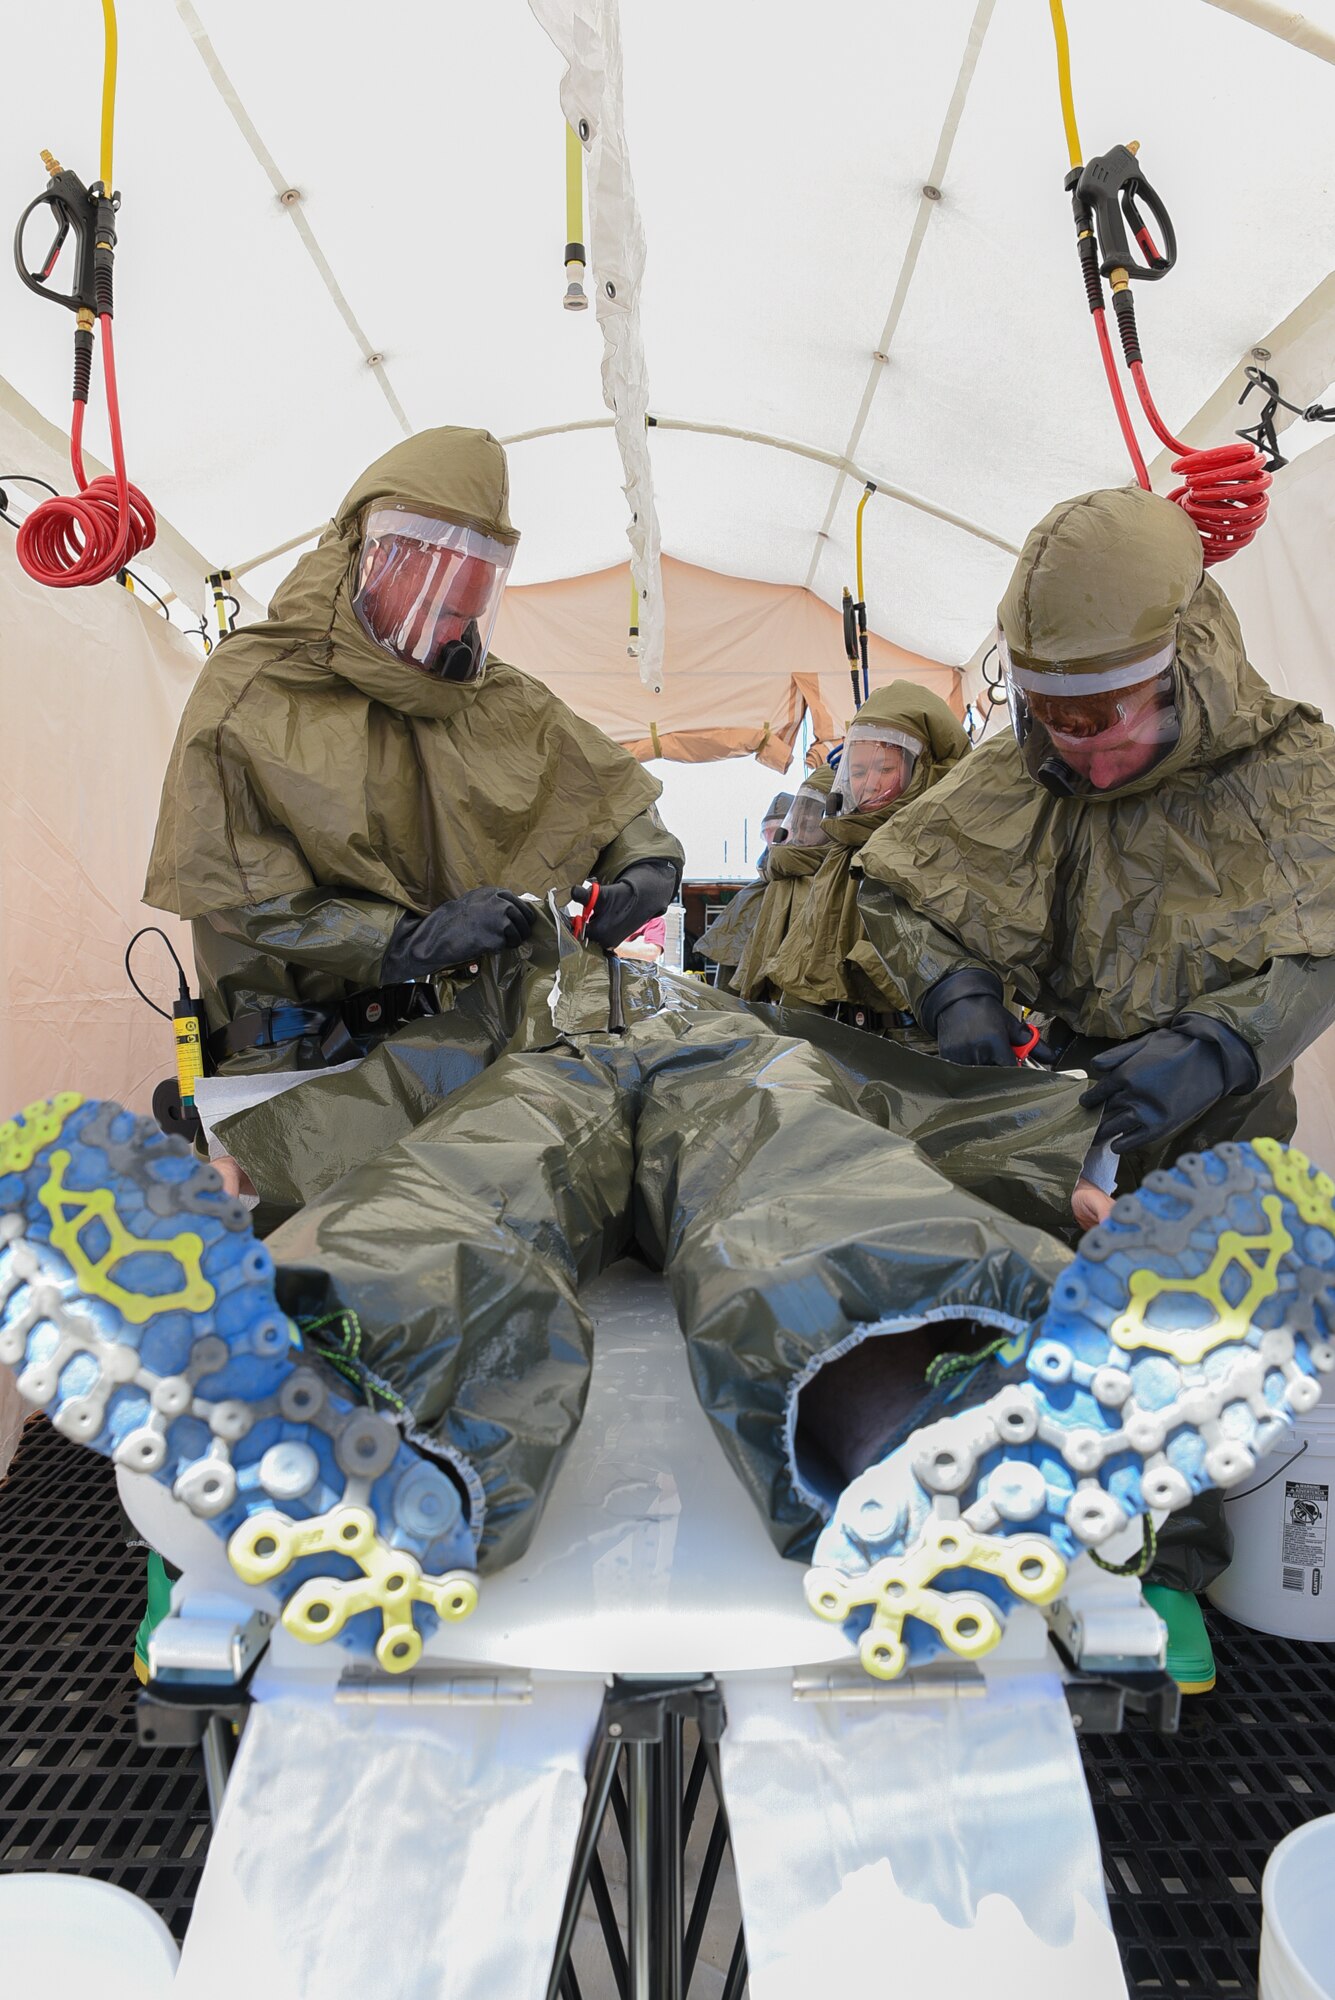 Airmen assigned to the 153rd Medical Group, decontaminate a simulated chlorine contaminated victim, June 19, 2015, at Cheyenne Air National Guard Base in Cheyenne, Wyo. The medical group is participating in Counter-CBRN All-Hazard Management Response (CAMR) training with civilian and military first responders to practice chemical, biological, radiological, first response, medical, and incident command scenarios for possible threats in the region. (U.S. Air National Guard photo by Master Sgt. Charles Delano)